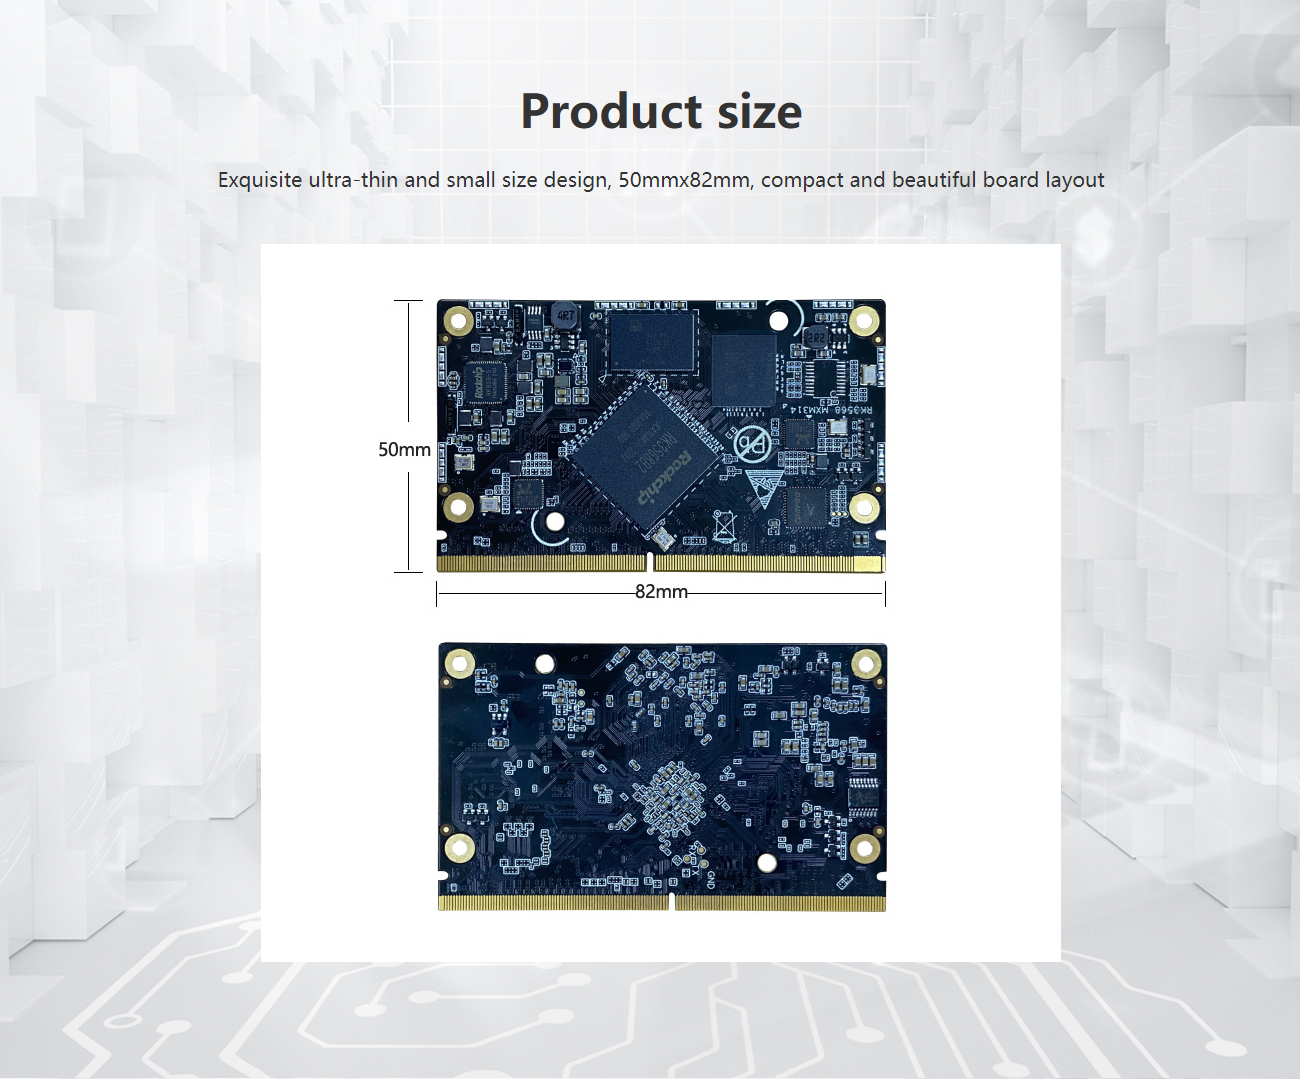 JHC-5683 High Performance Gold Finger AI Core Board